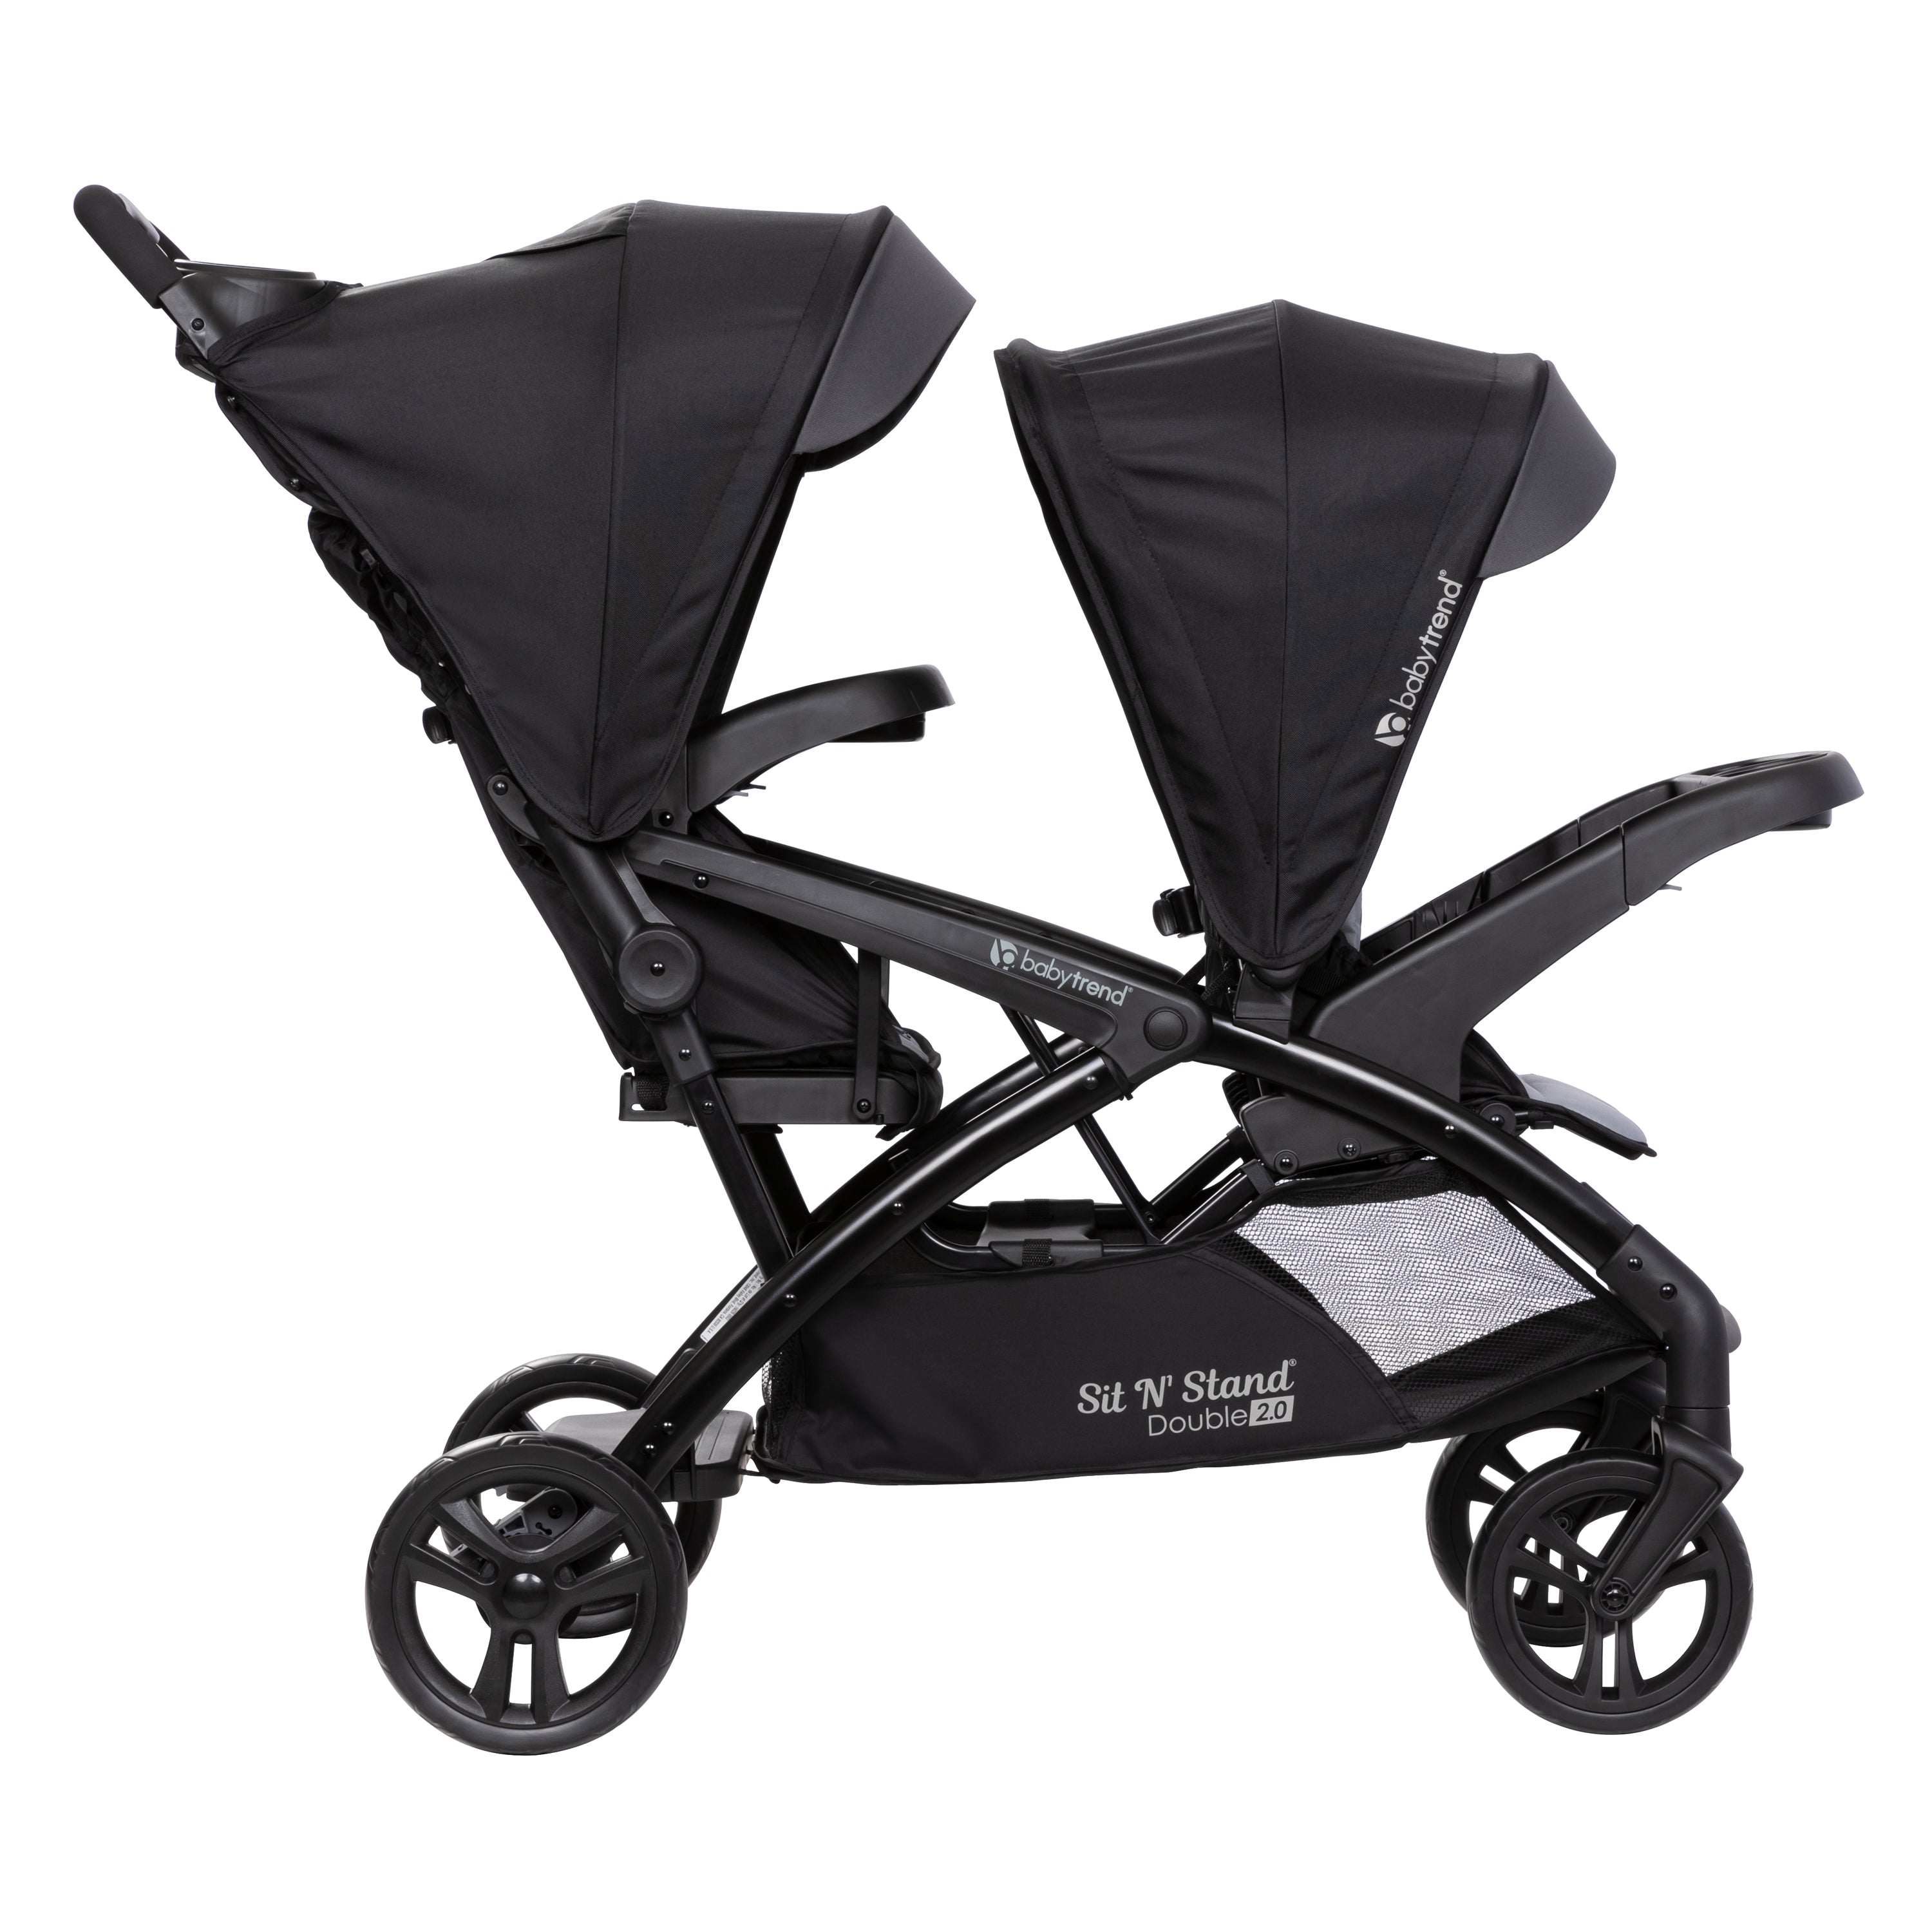  Toddler Stroller for Twins Side by Side, Detachable 2